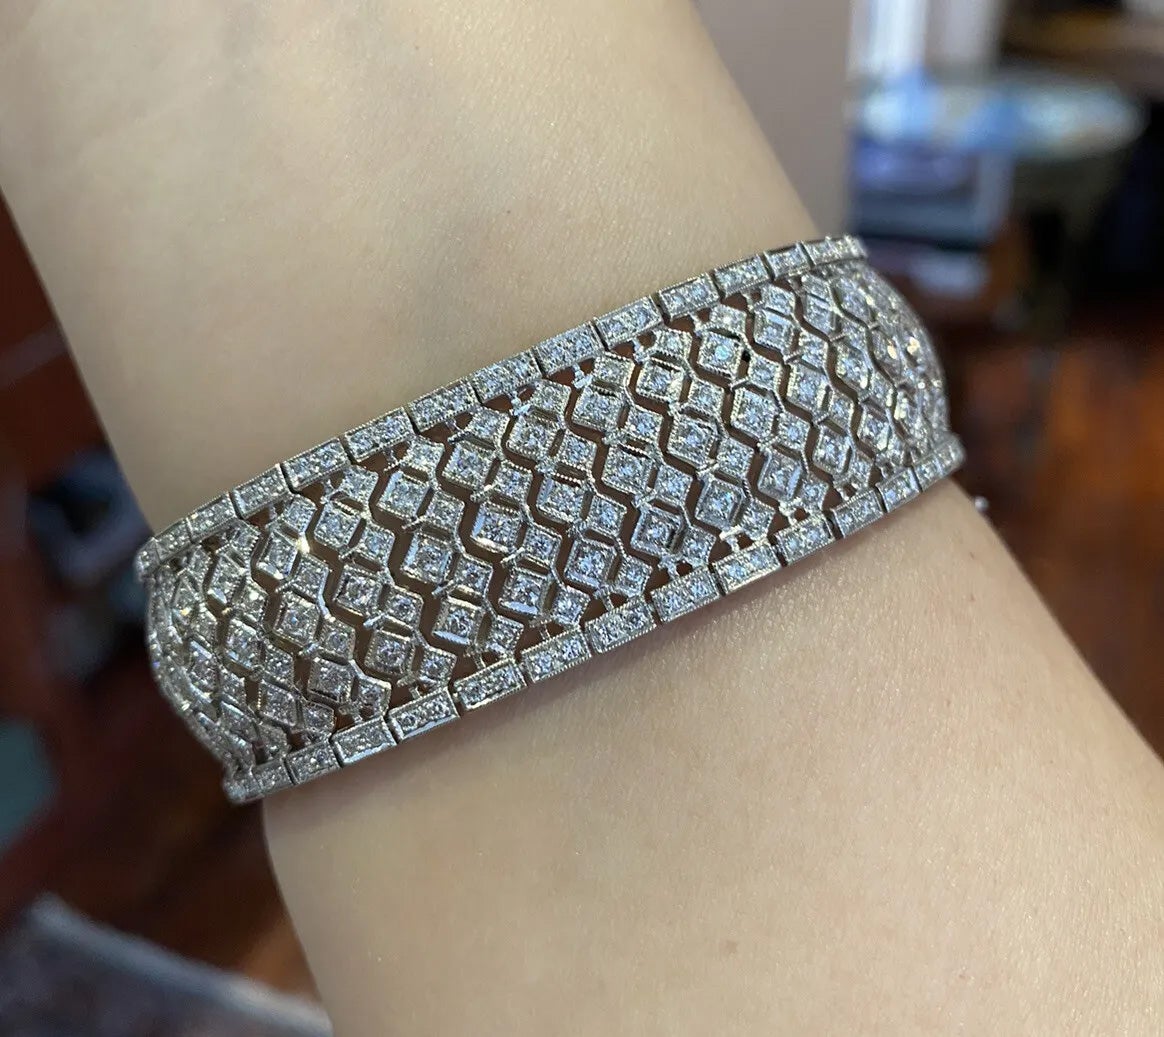 Diamond Wide Filigree Bracelet with 7.00 Carat Total Weight in Platinum

Wide Diamond Bracelet features Round Brilliant Diamonds in a Deco inspired pattern set in a wide Platinum setting with beautiful workmanship and Milgrain edges.

Total diamond